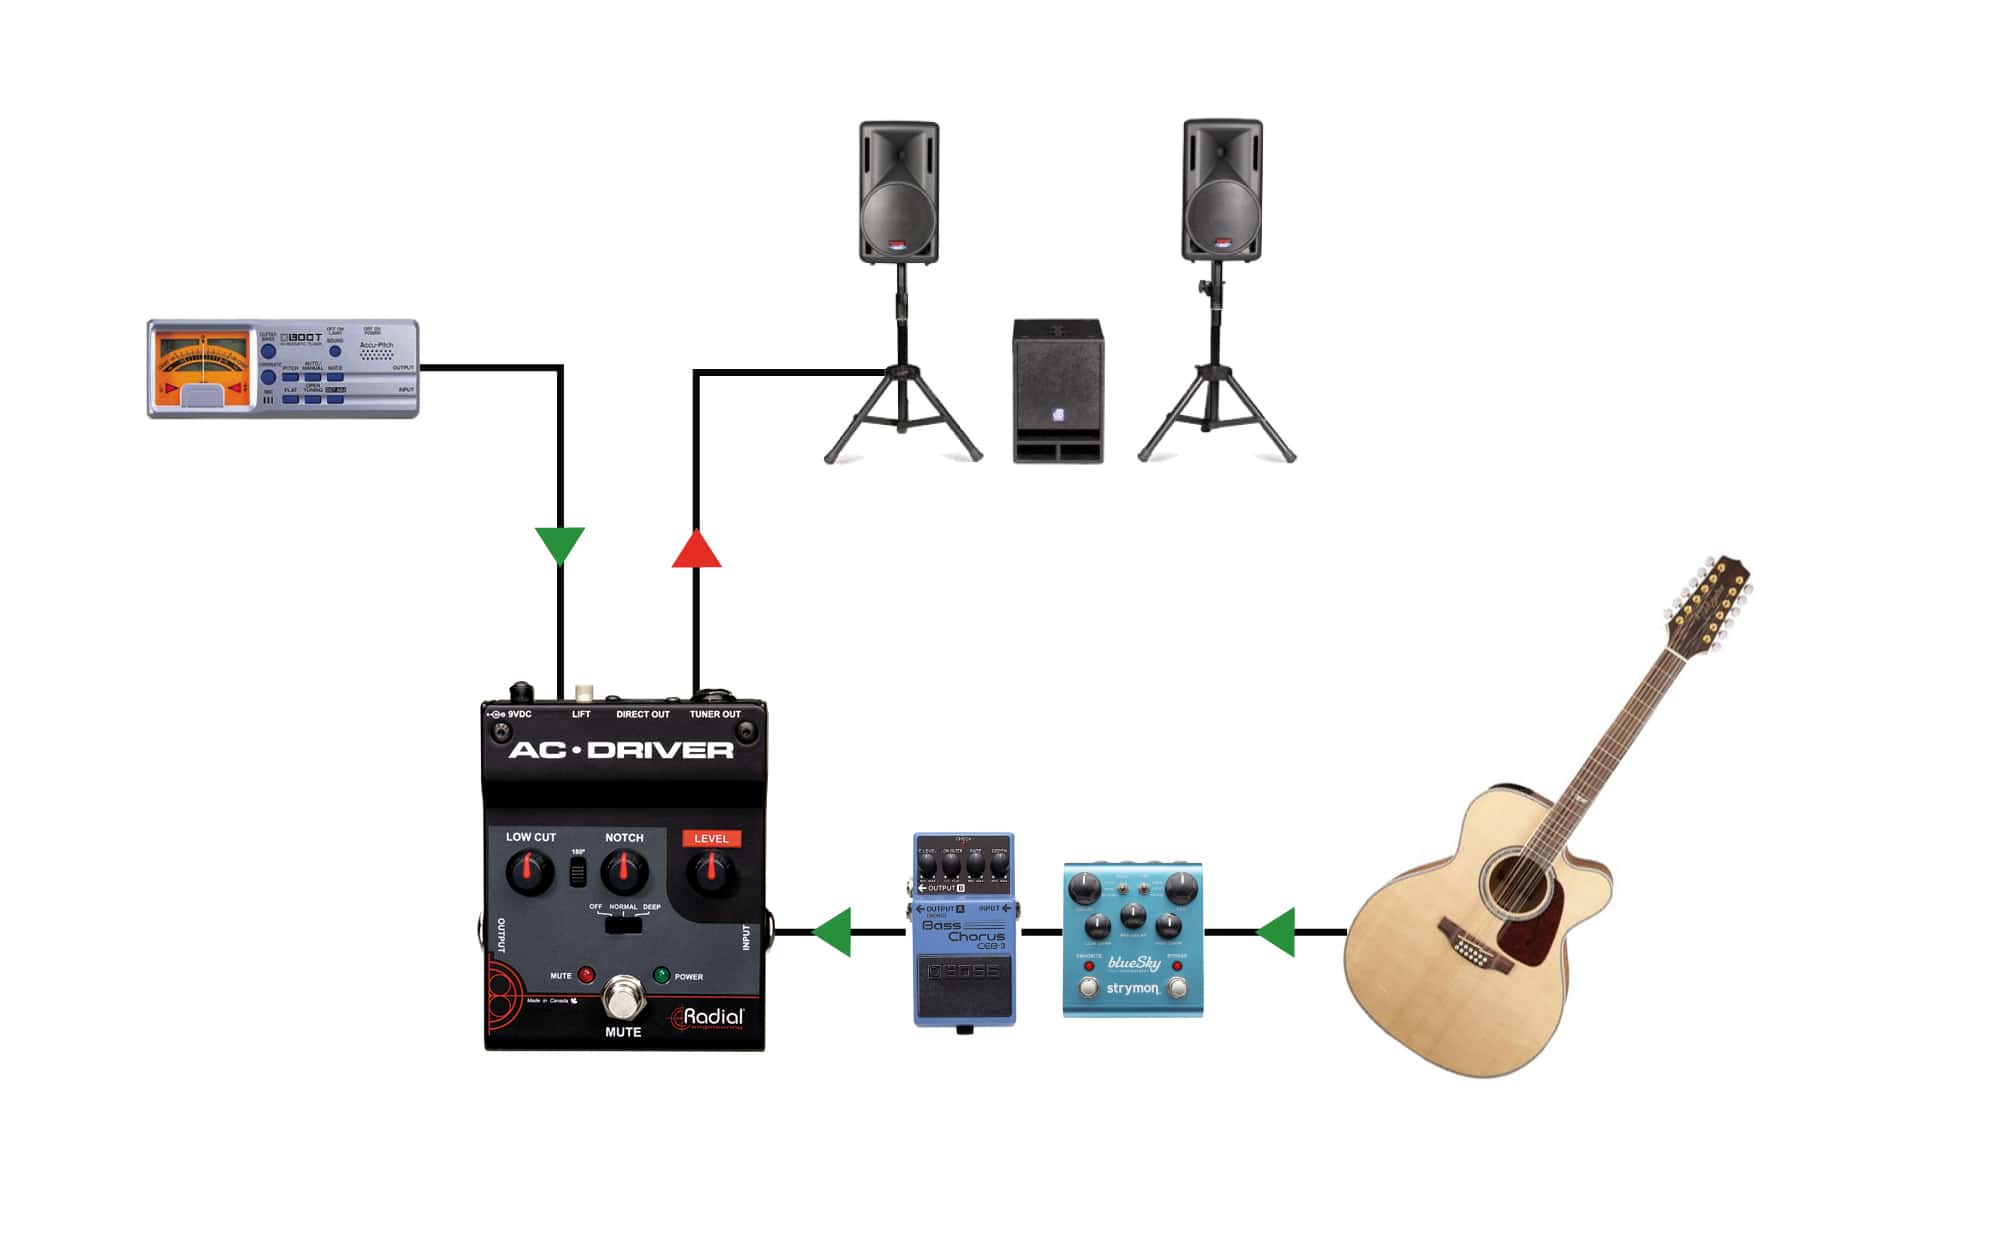 Radial AC-Driver flow chart with acoustic guitar and pedals